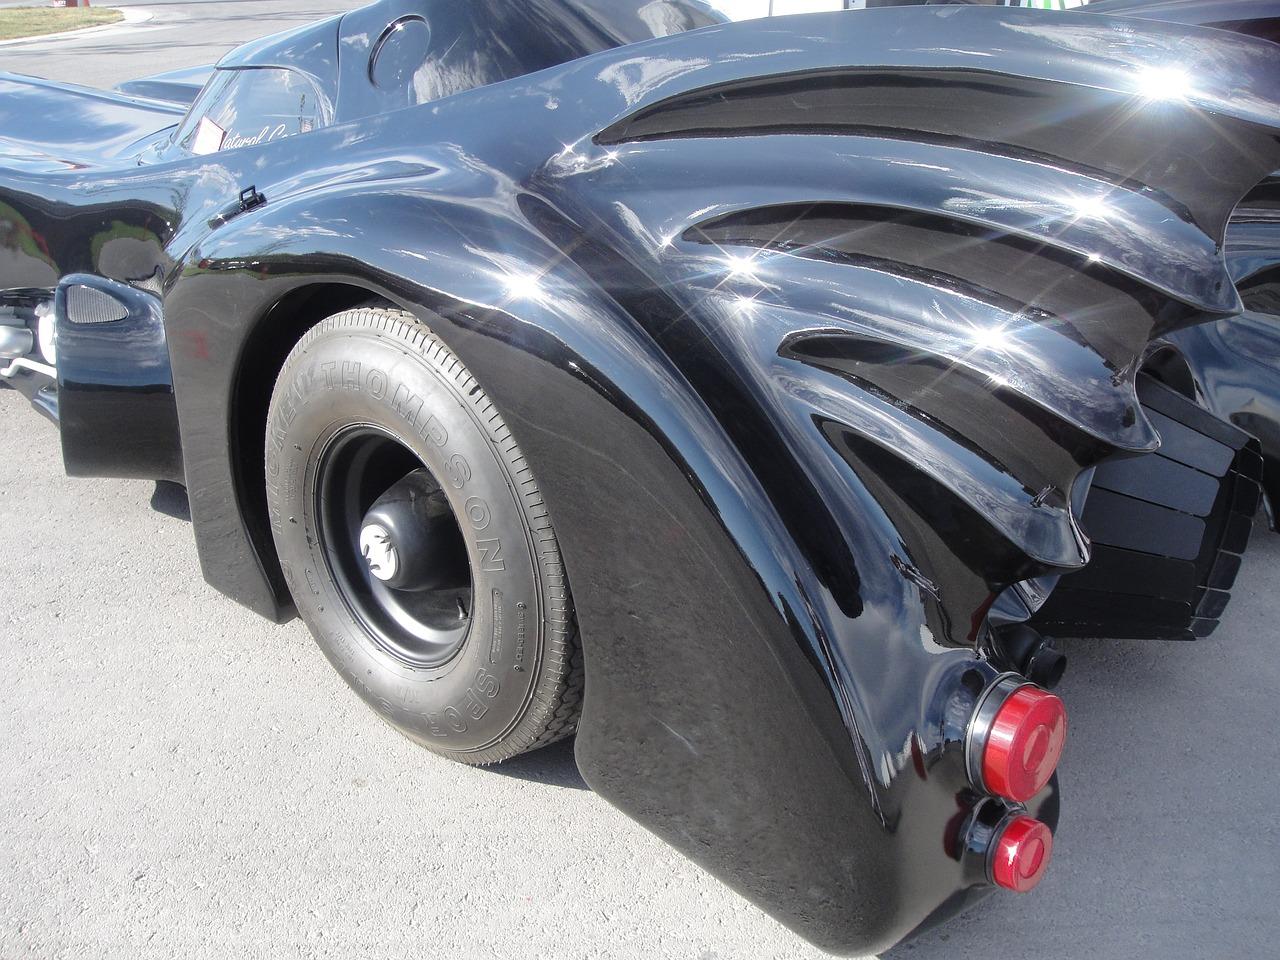 Batmobile Replica at Center of Lawsuit against Upstate NY Town Supervisor Thumbnail